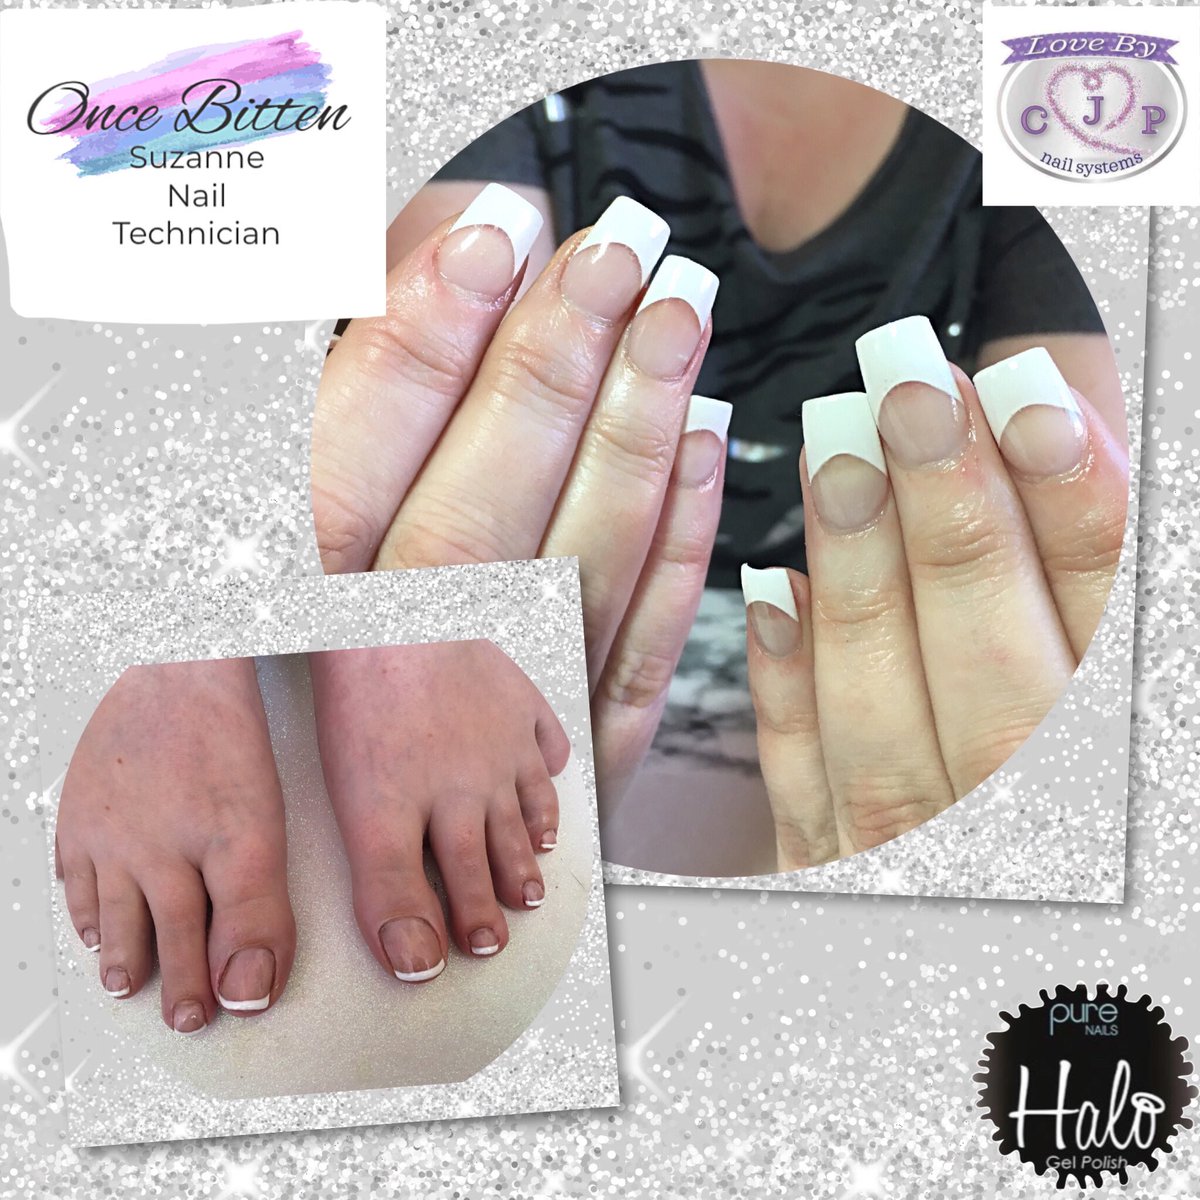 First day back at work yesterday and Nicola came for french fingers & toes for her holibobs. Have a great time. Xx

#GelPolish #PureNails
#Halo 
#CJPAcrylicSystems #NailArt
#Pampertime #Homebased 
#StockportNailTech #SK5Reddish
#NailsOfInstagram #ShowScratch
#ScratchMagazine